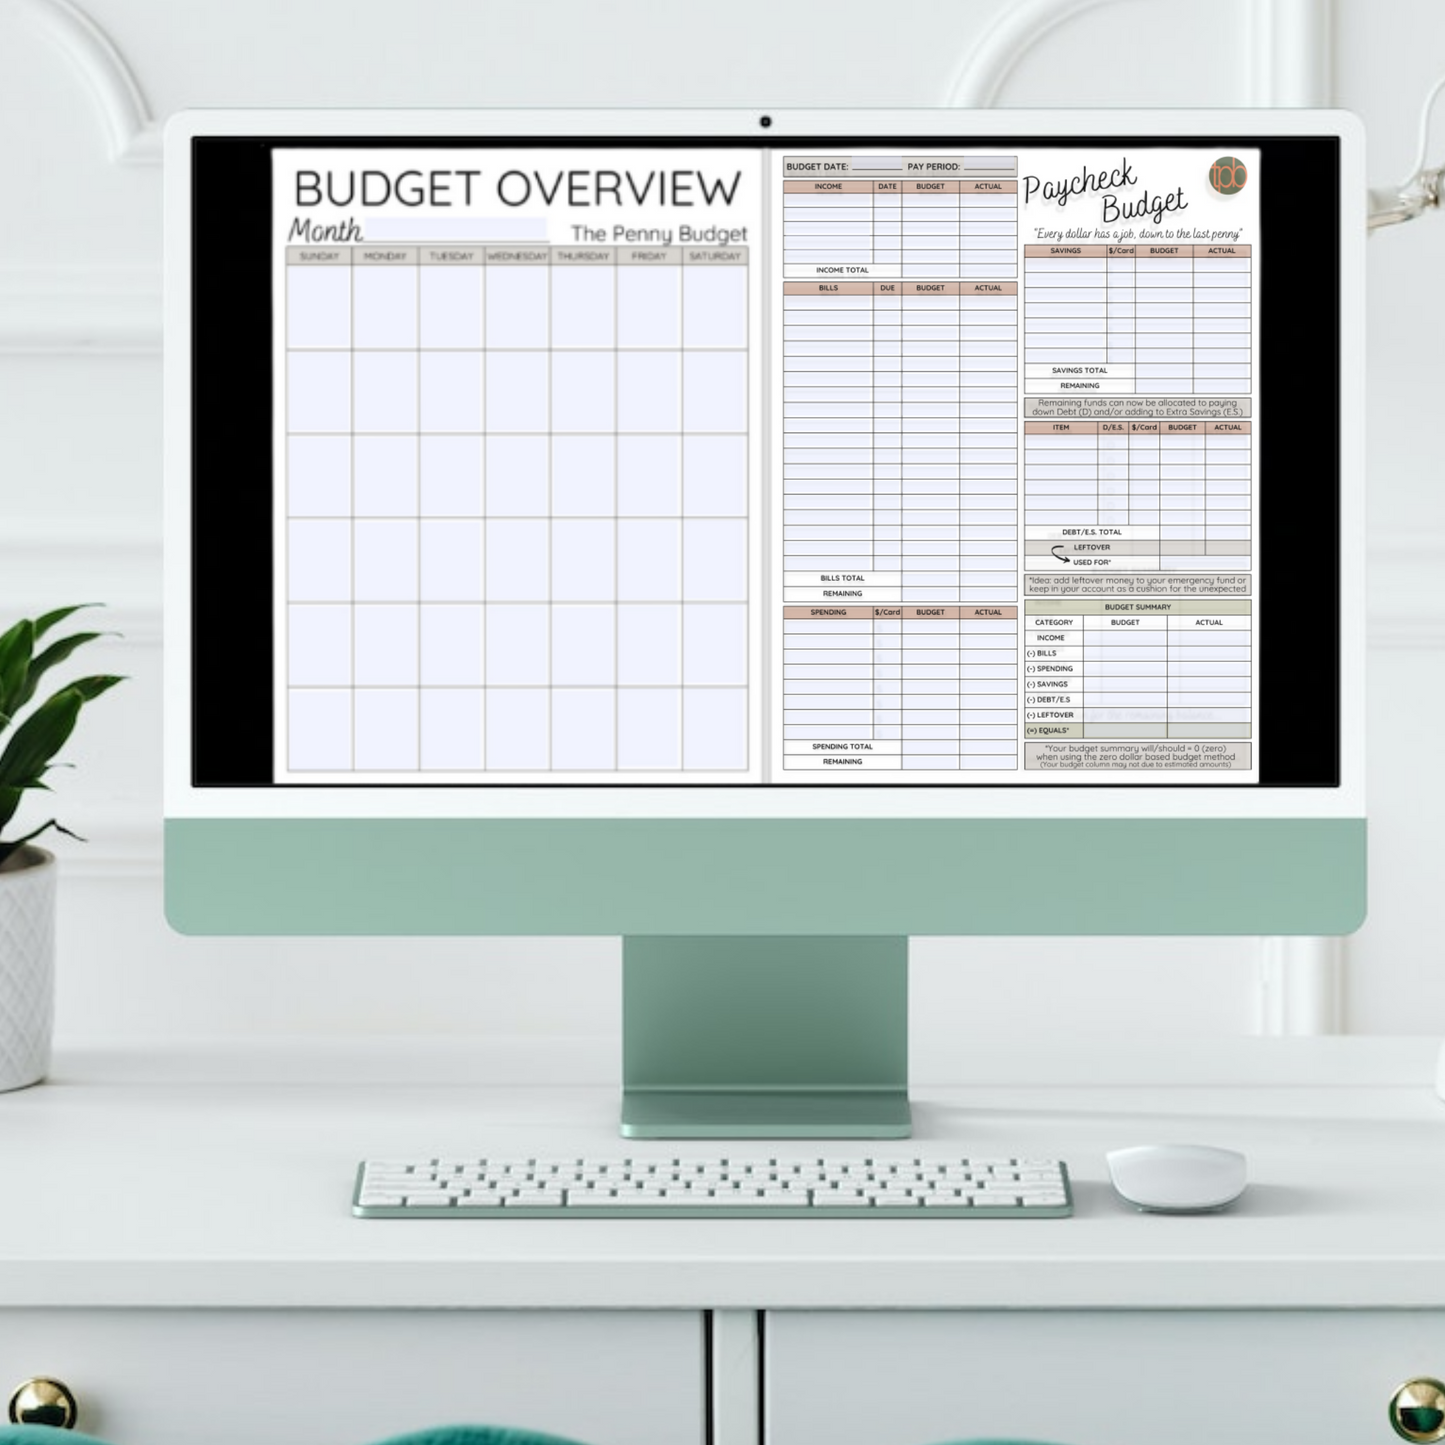 Fillable Digital Paycheck Planner - Step One